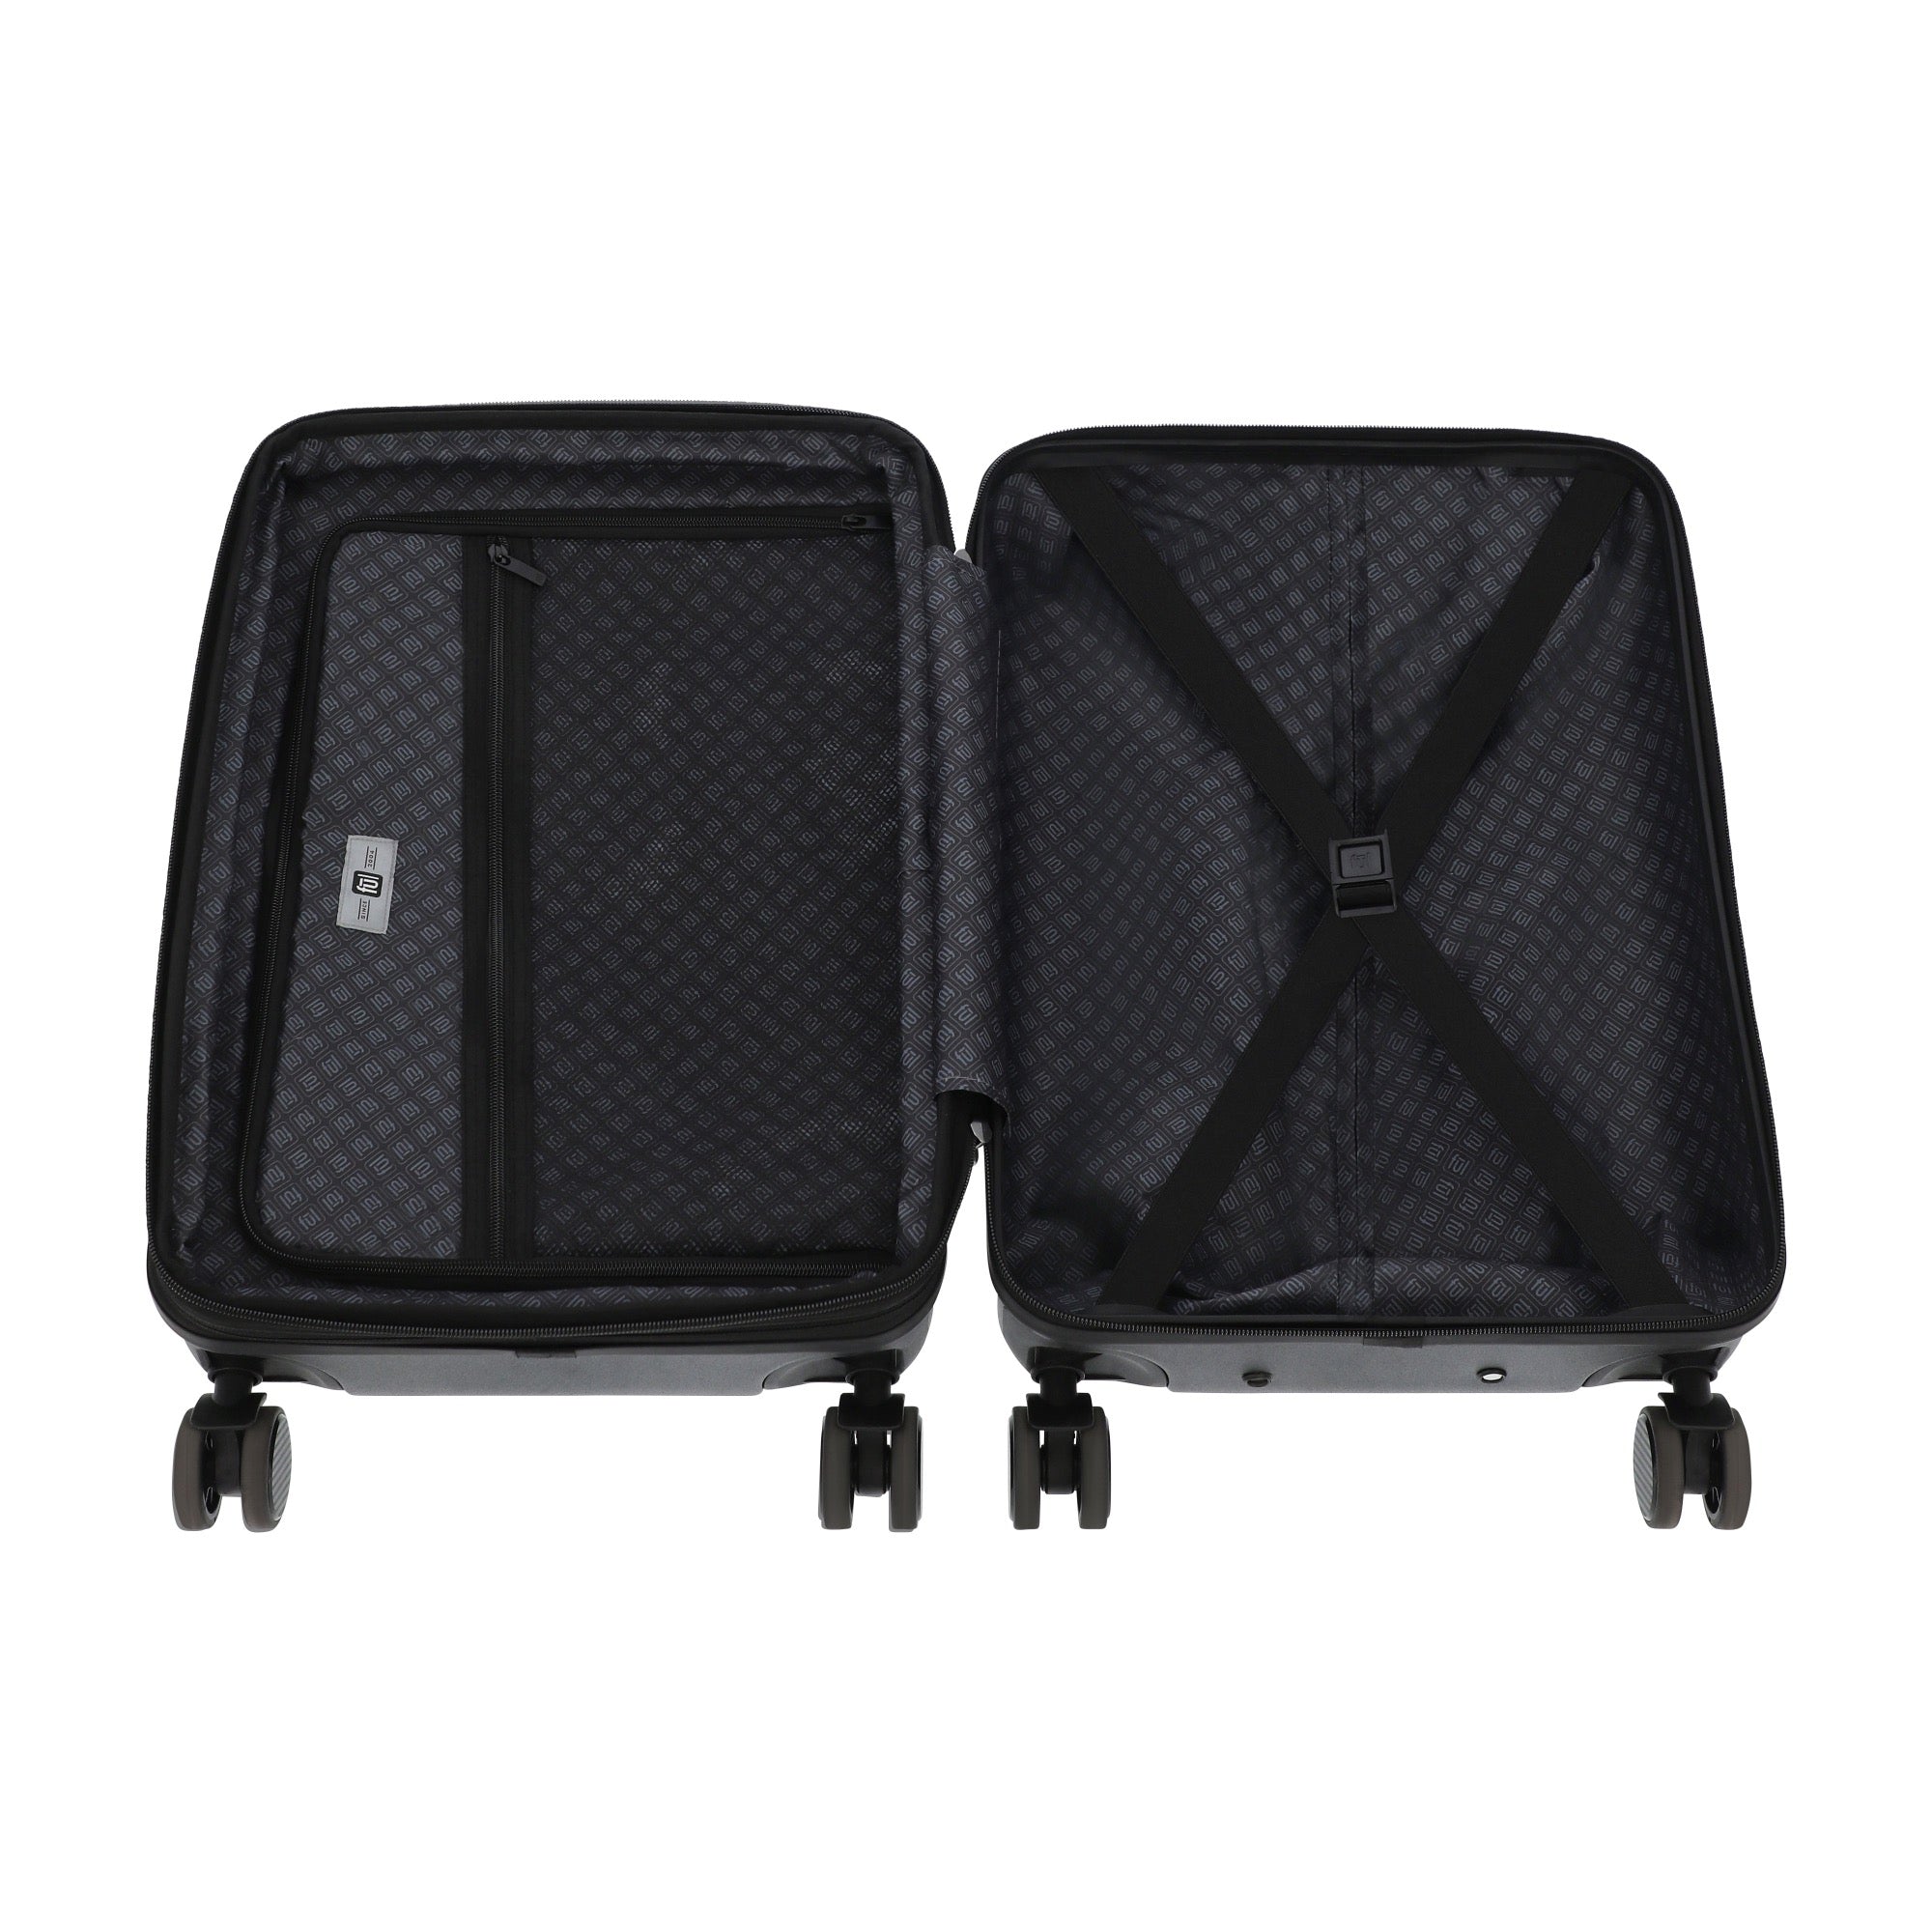 black carry-on spinner suitcase luggage by Ful